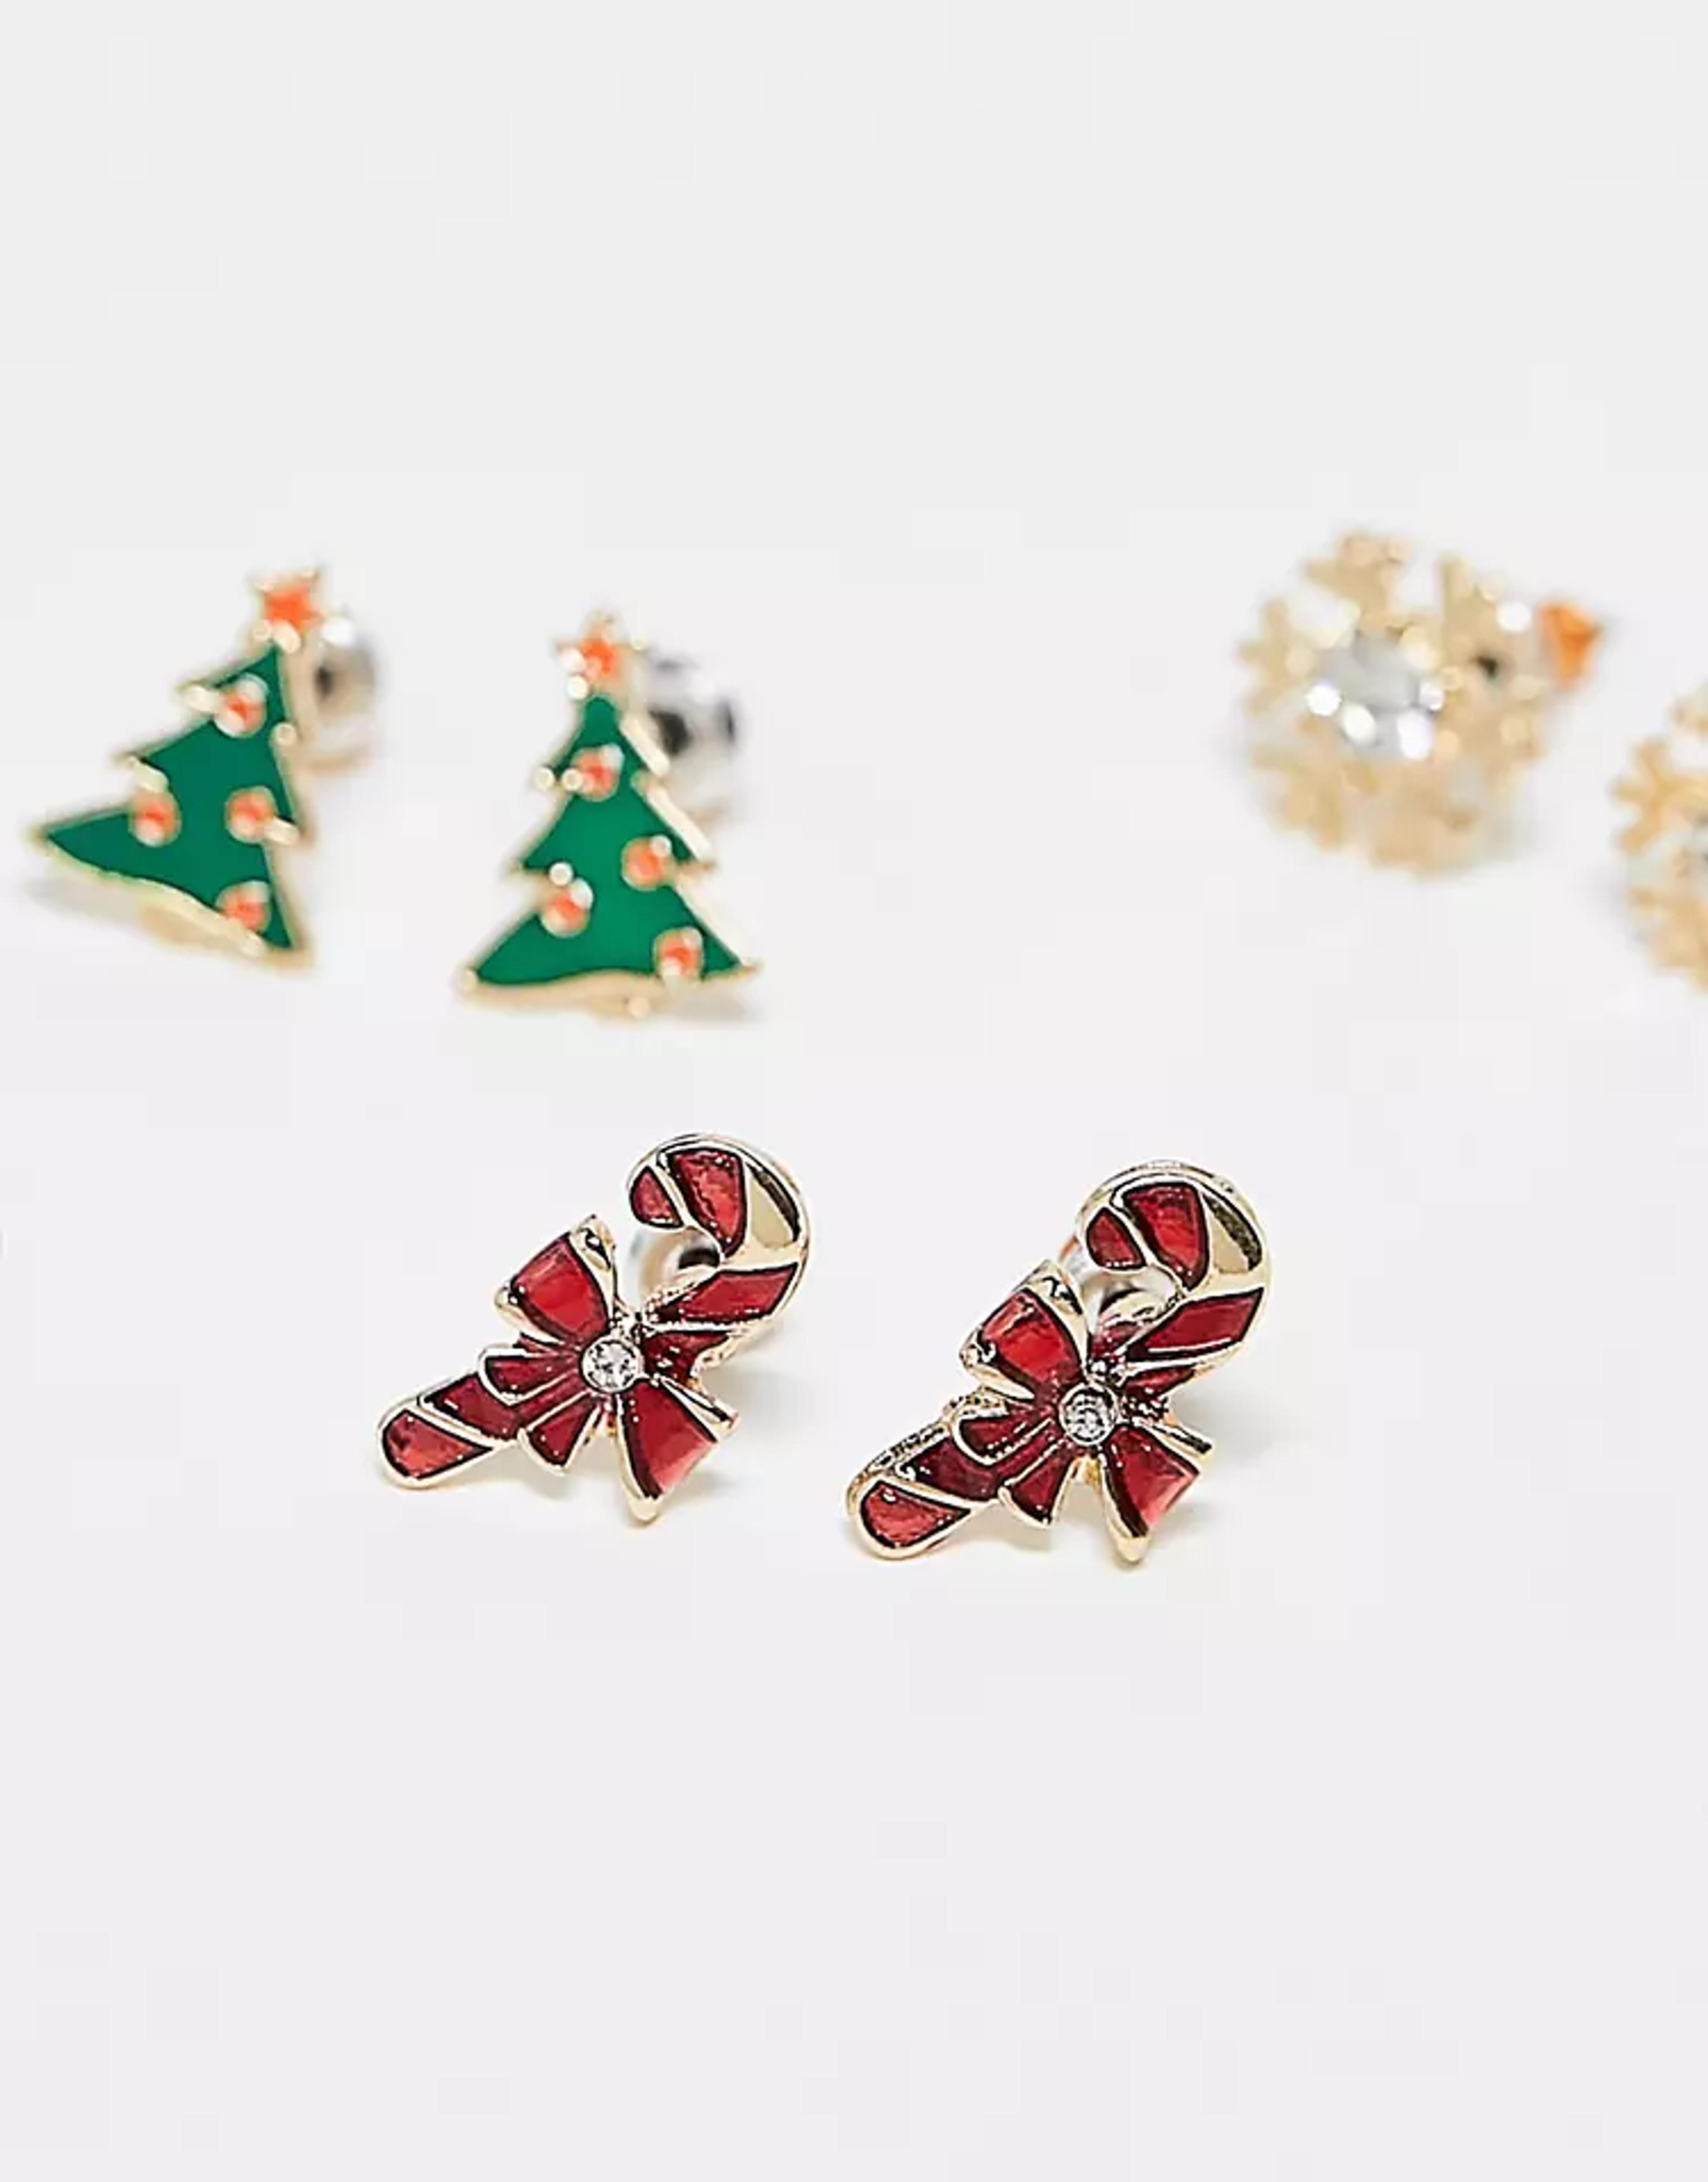 ASOS DESIGN Christmas pack of 4 novelty earrings with tree and candy cane design | ASOS